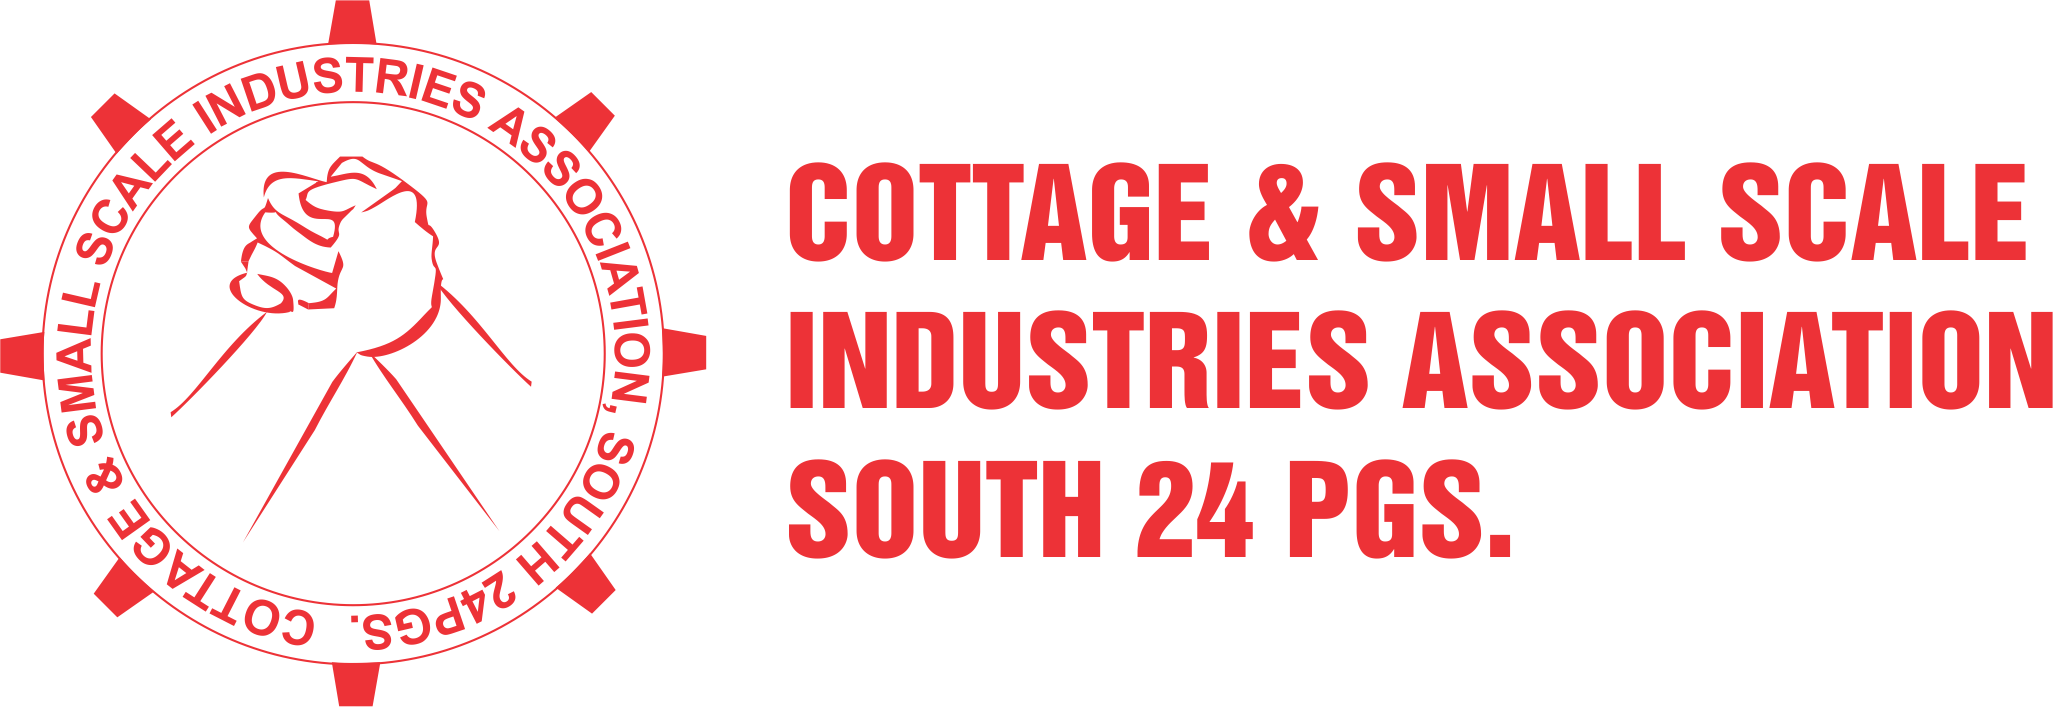 cottage scale industries